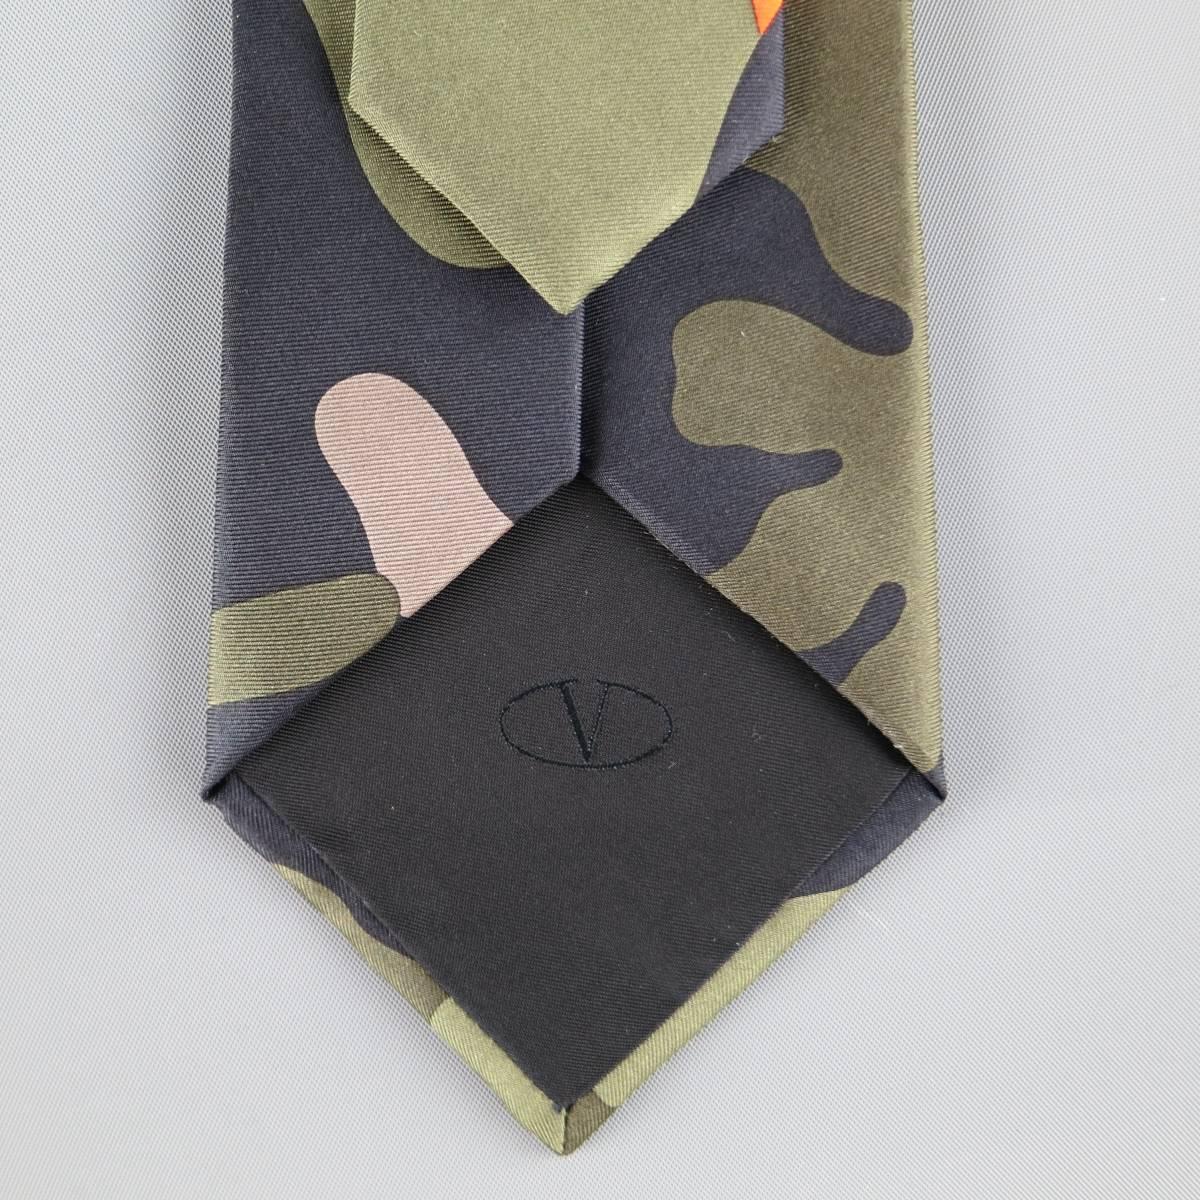 Gray VALENTINO dress tie comes in large scale camouflage print with hues of olive gre